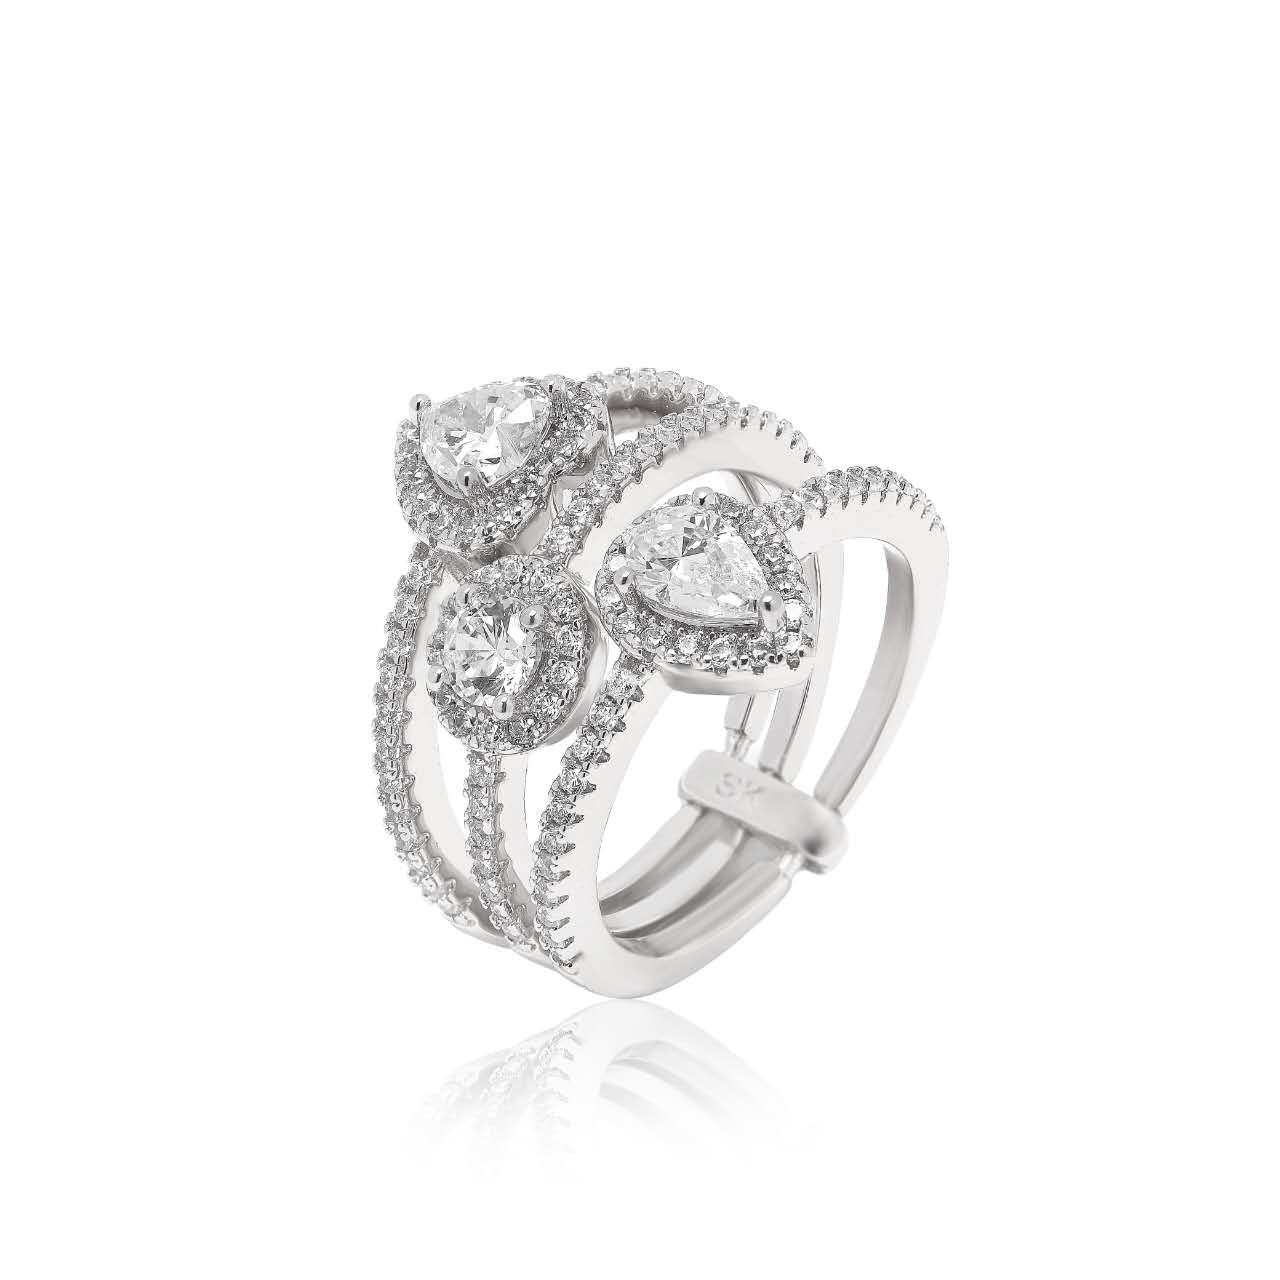 Supercilious Solitaire Ring